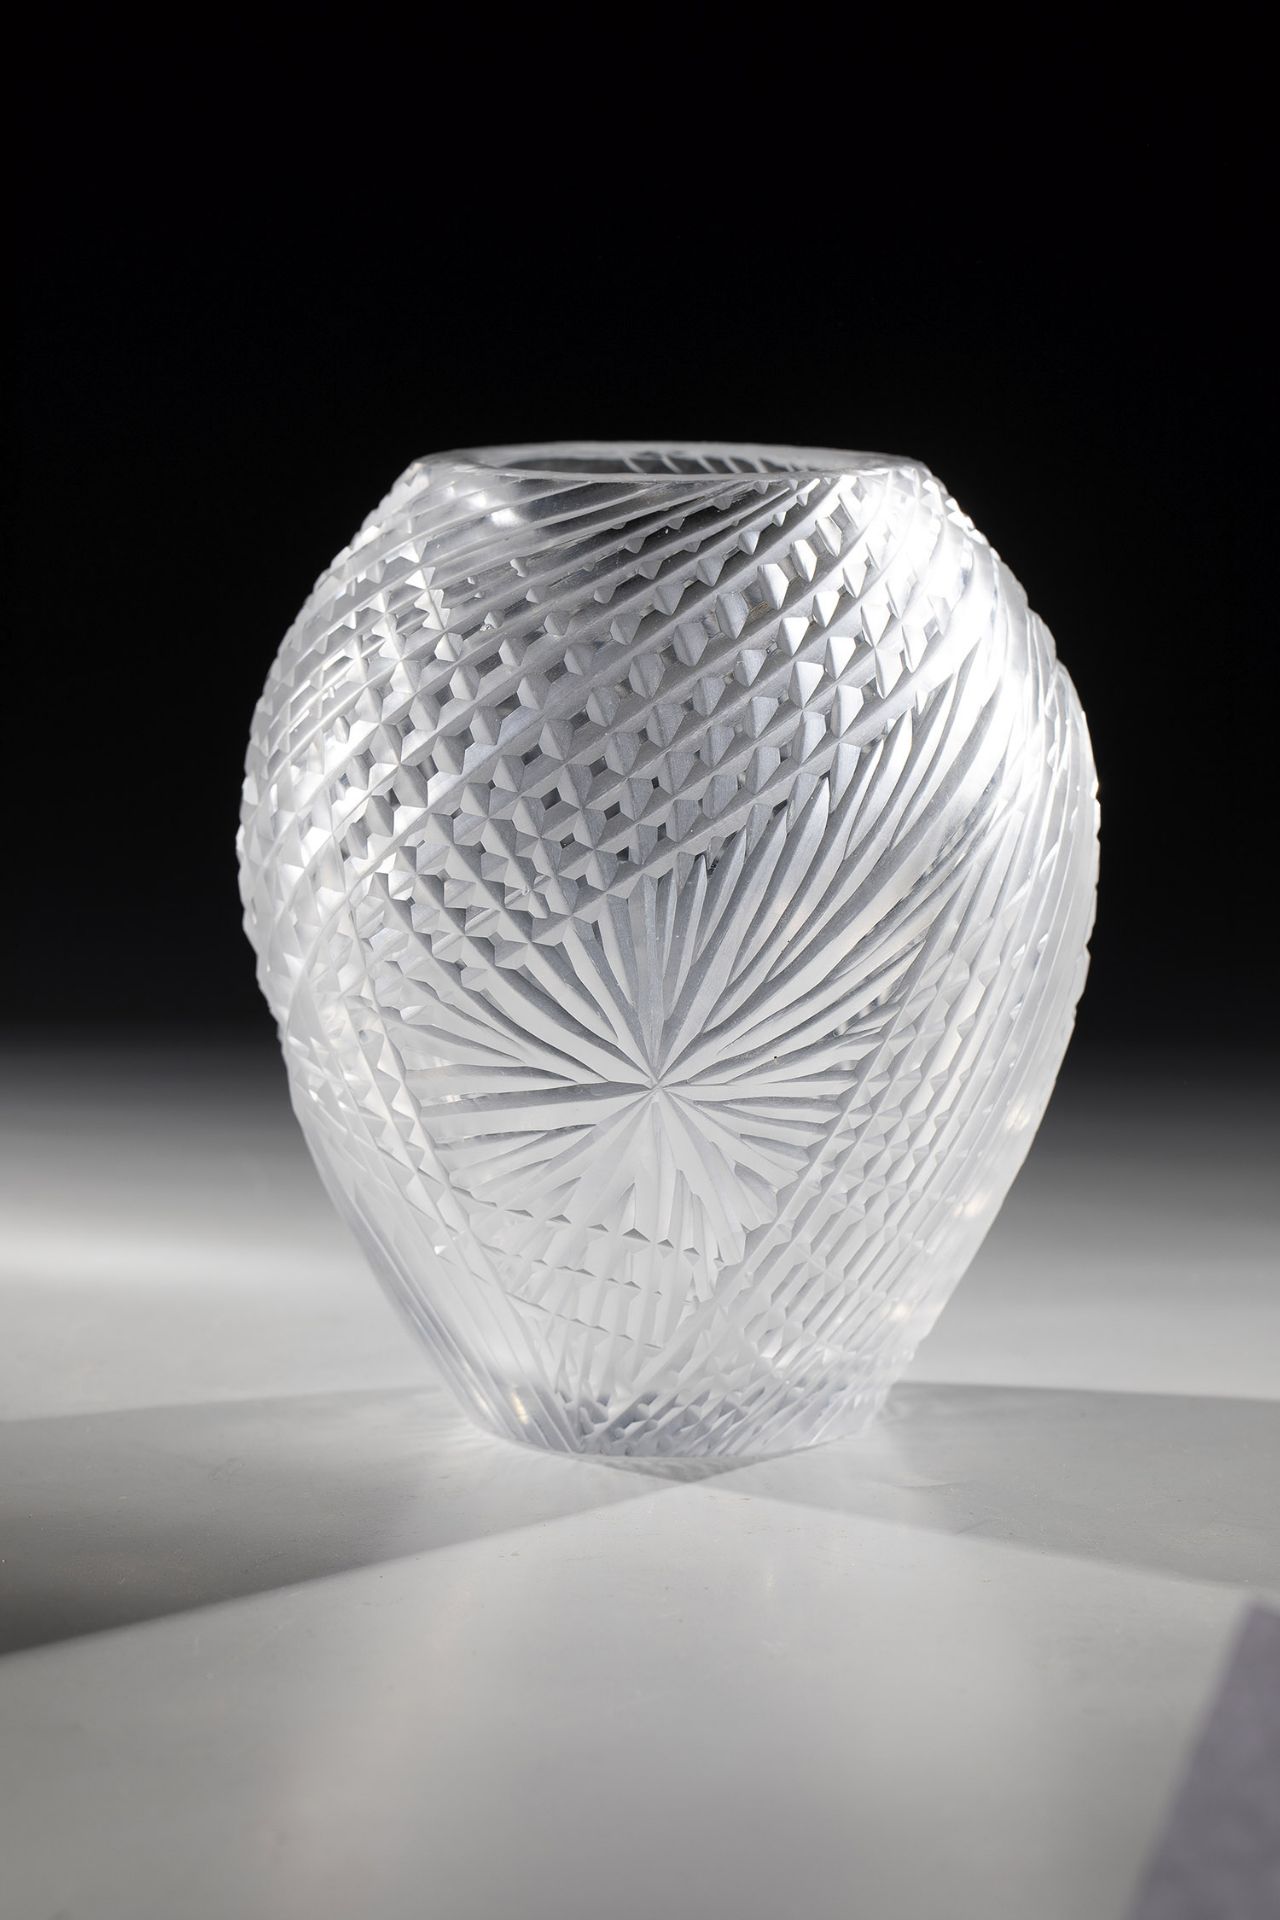 Vase Hanns Model, 1979 Colourless glass, with space-like and partly polished carving structures.